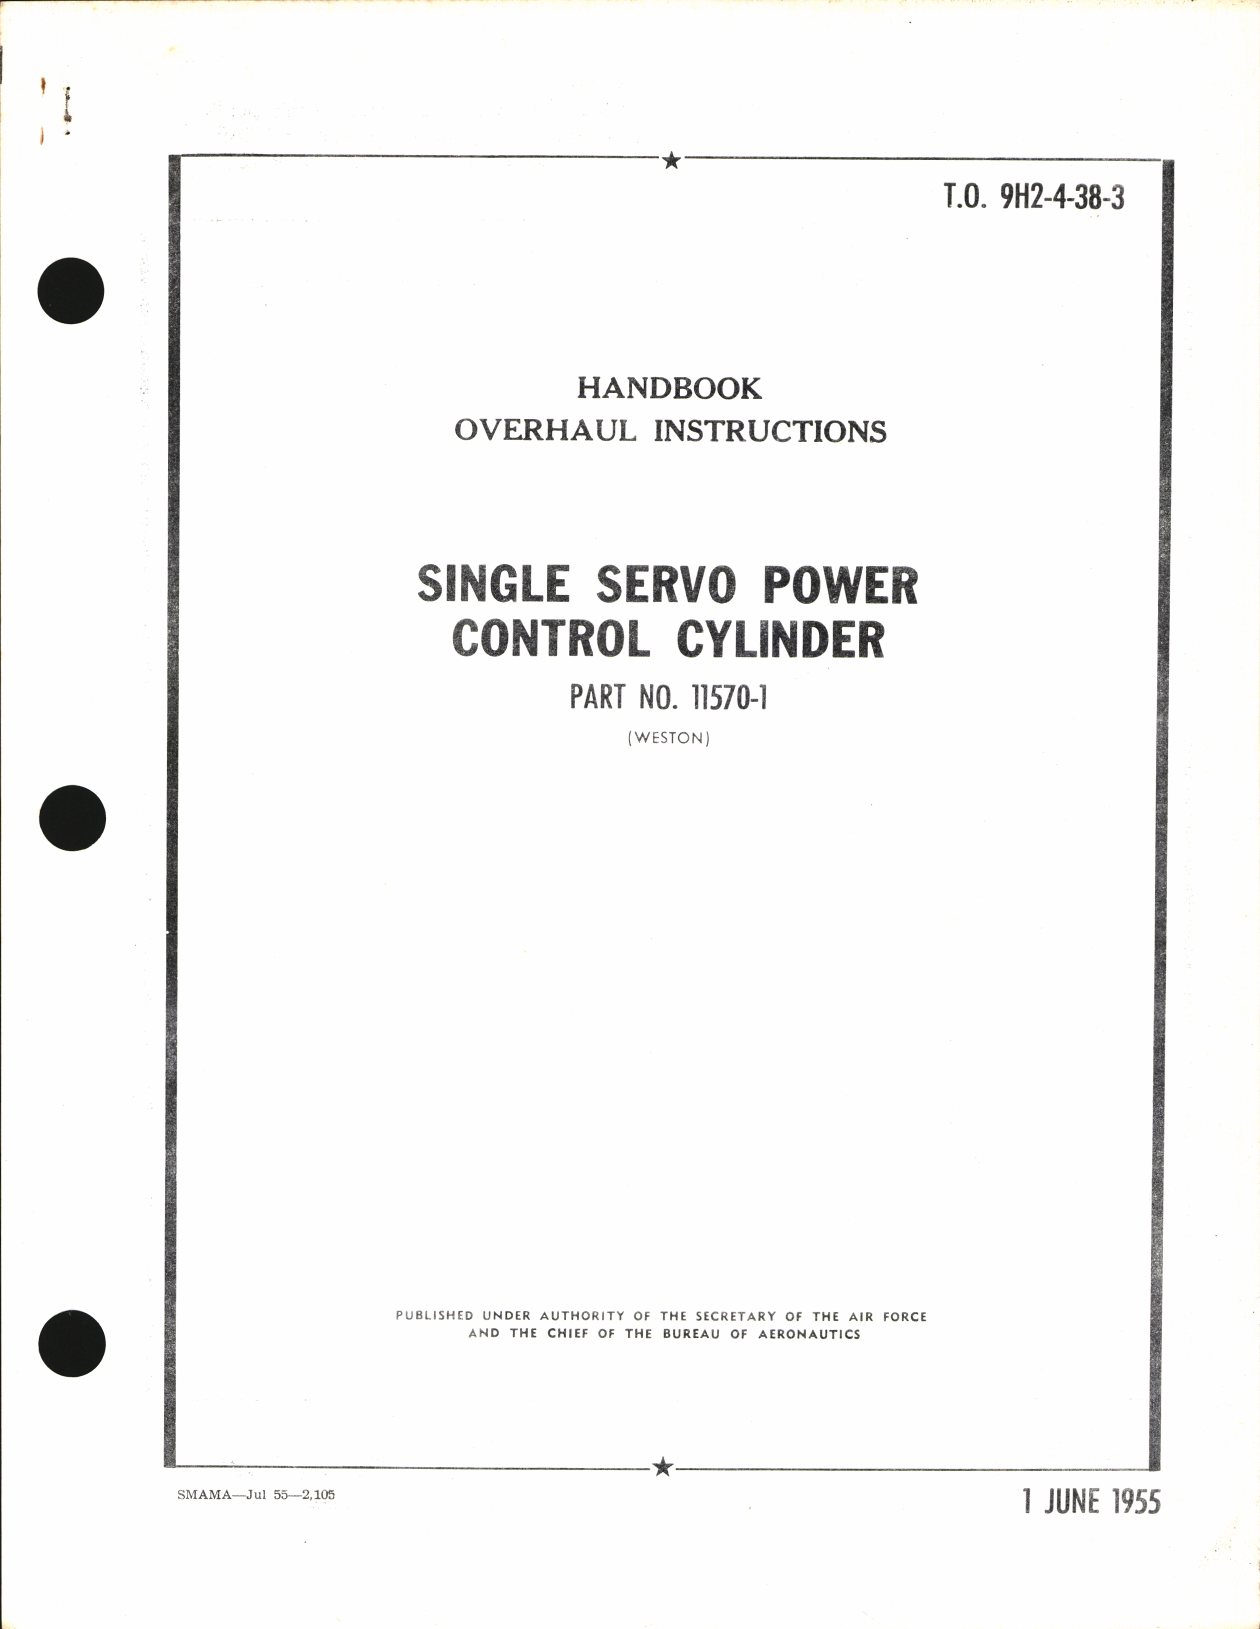 Sample page 1 from AirCorps Library document: Overhaul Instructions for Single Servo Power Control Cylinder Part No. 11570-1